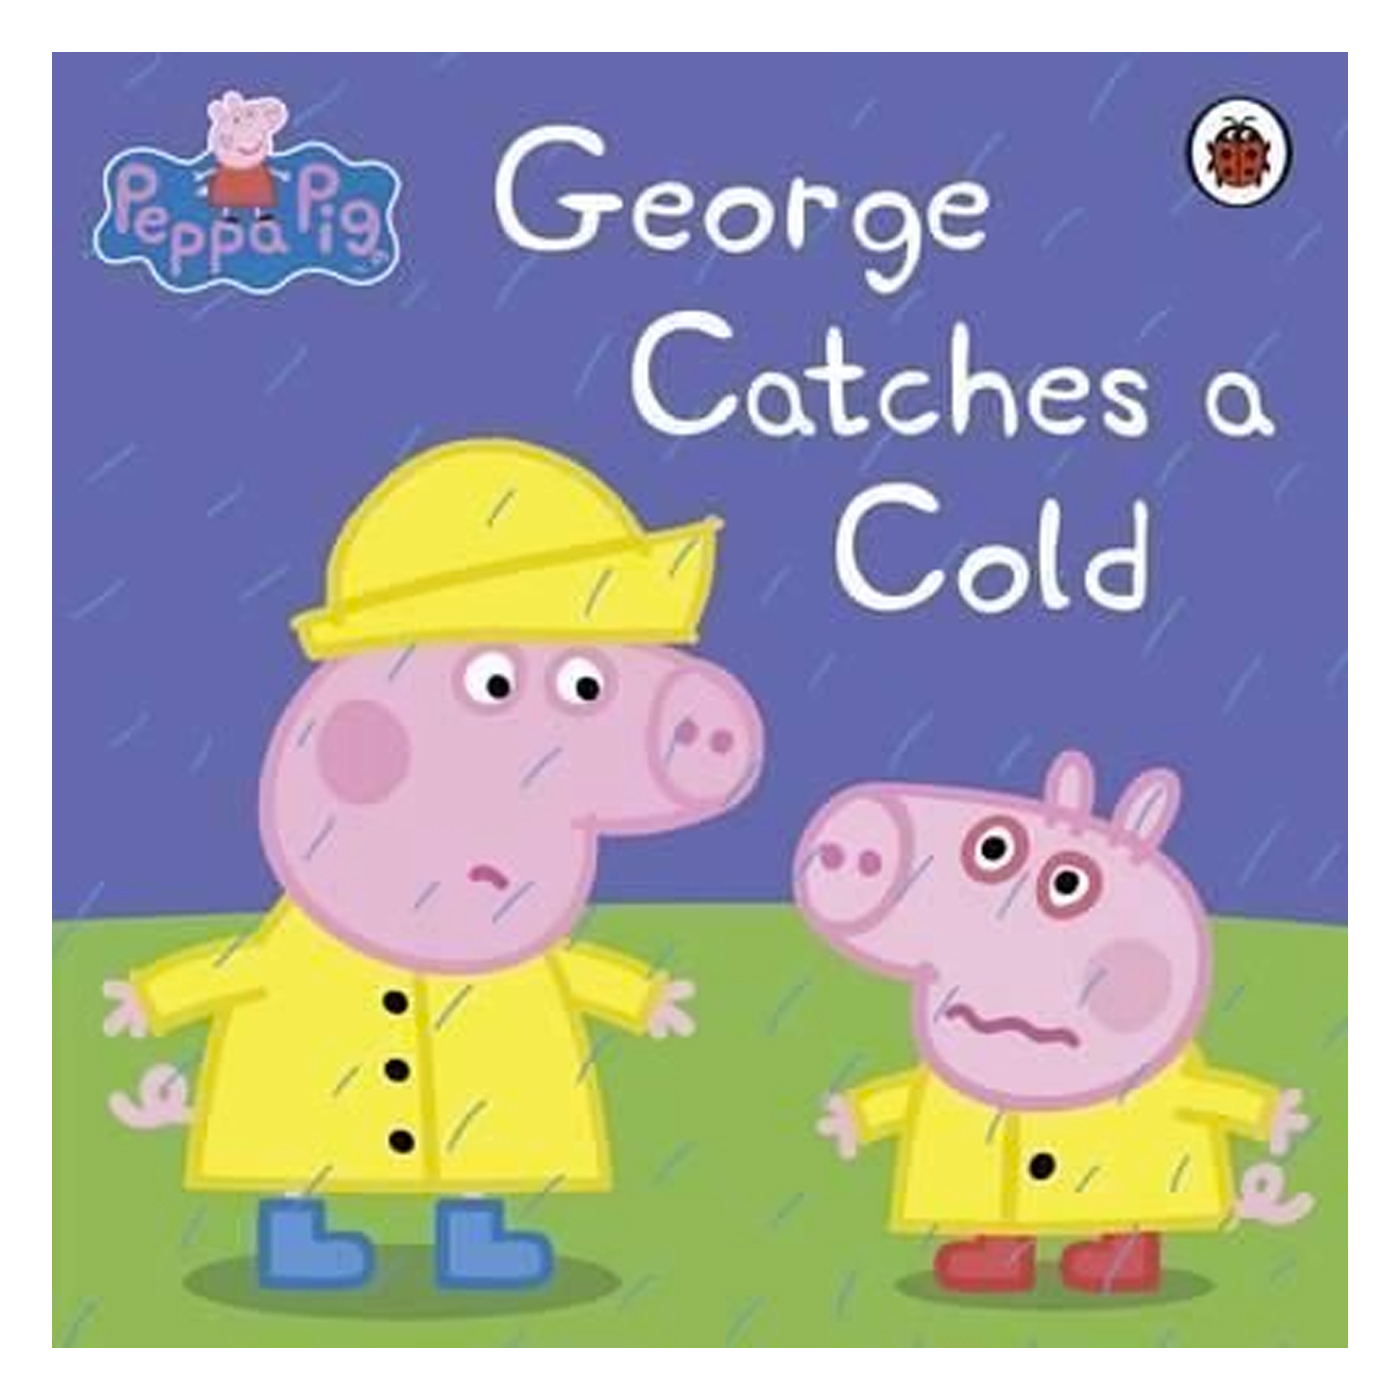 LADYBIRD Peppa Pig: George Catches a Cold